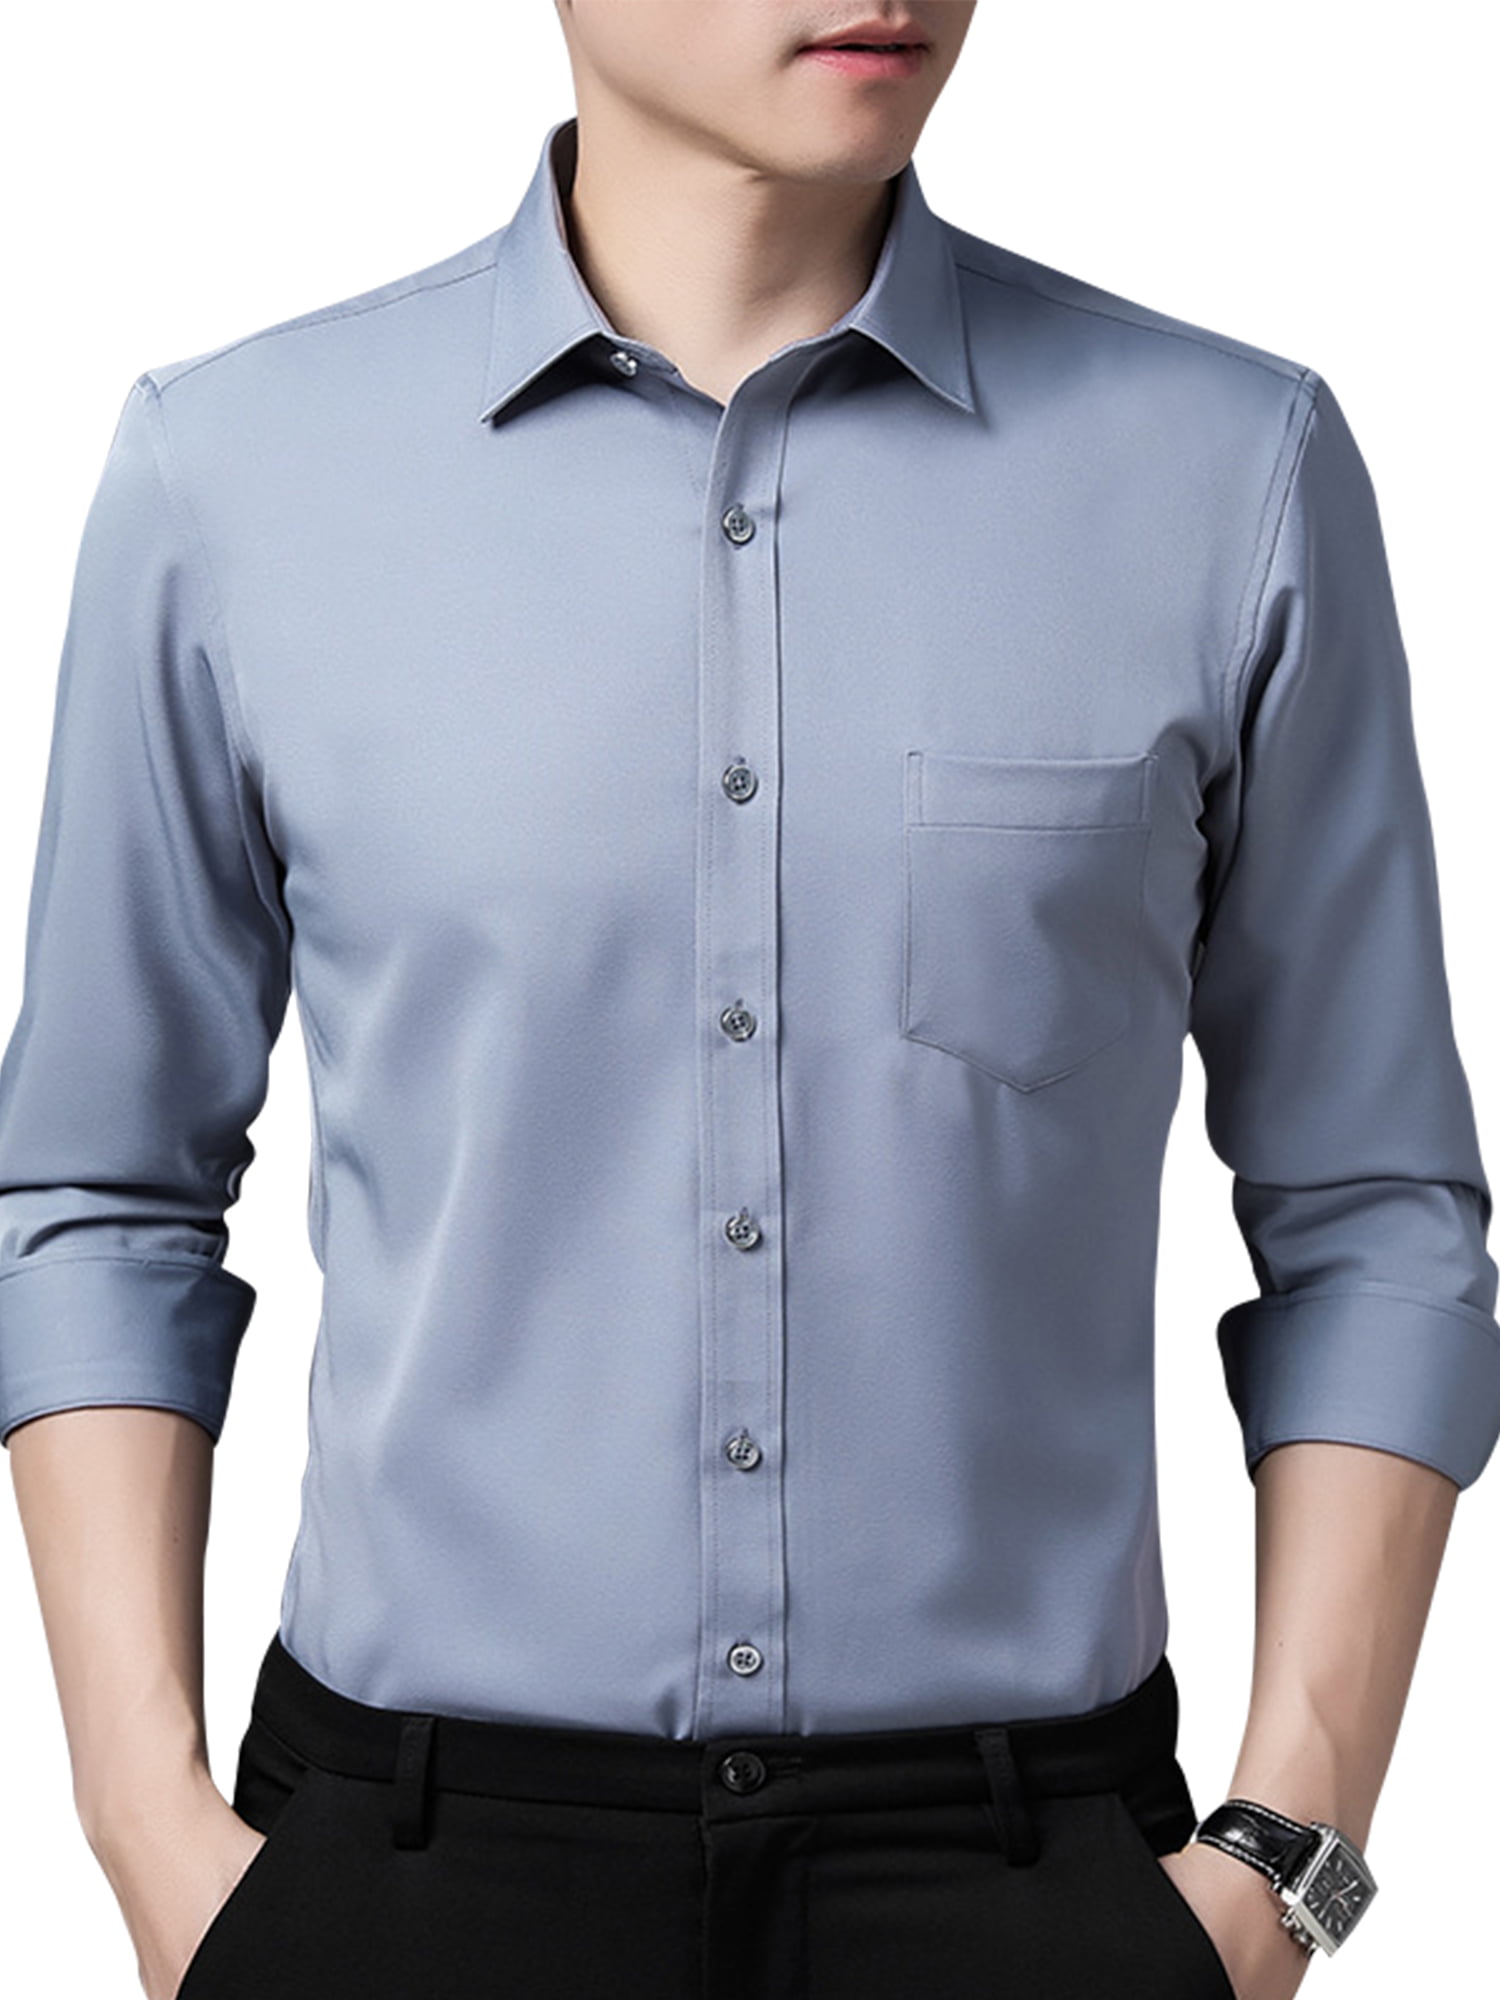 Sweatwater Men Pure Color Business Long-Sleeve Casual Button Down Shirts 